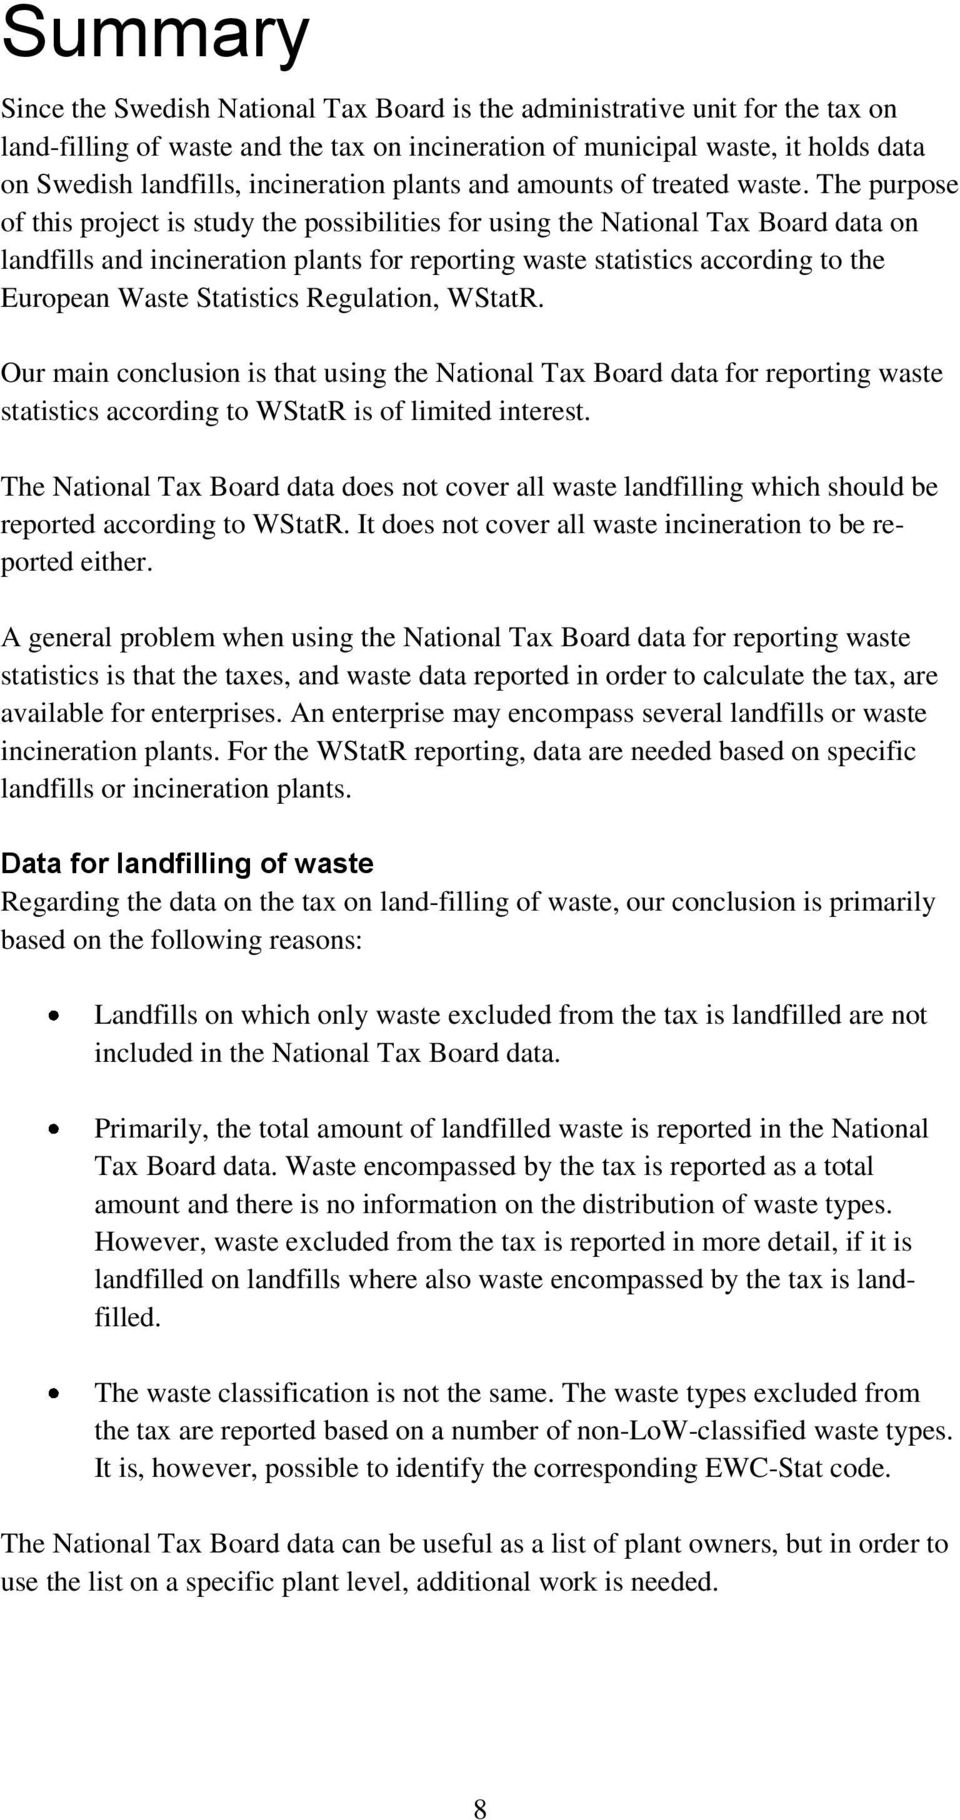 The purpose of this project is study the possibilities for using the National Tax Board data on landfills and incineration plants for reporting waste statistics according to the European Waste